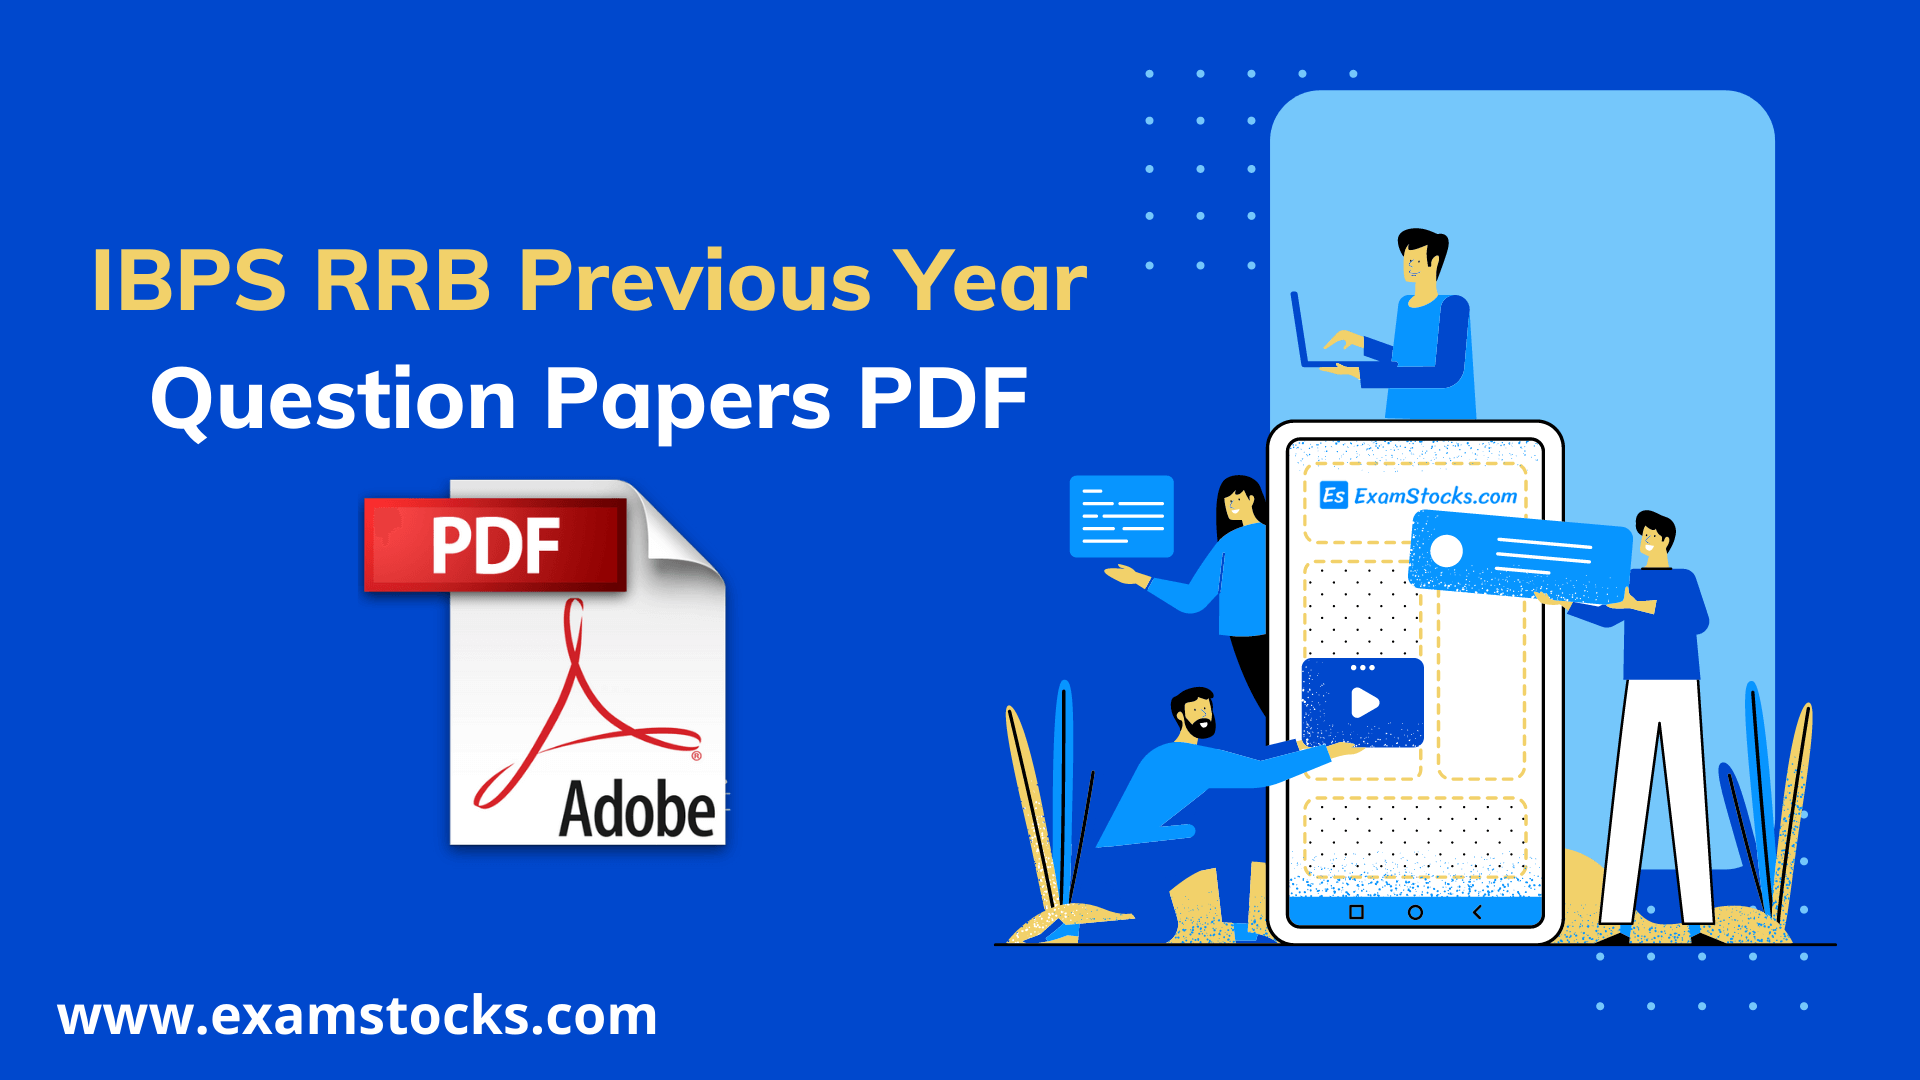 IBPS RRB Previous Year Question Papers PDF Download Now